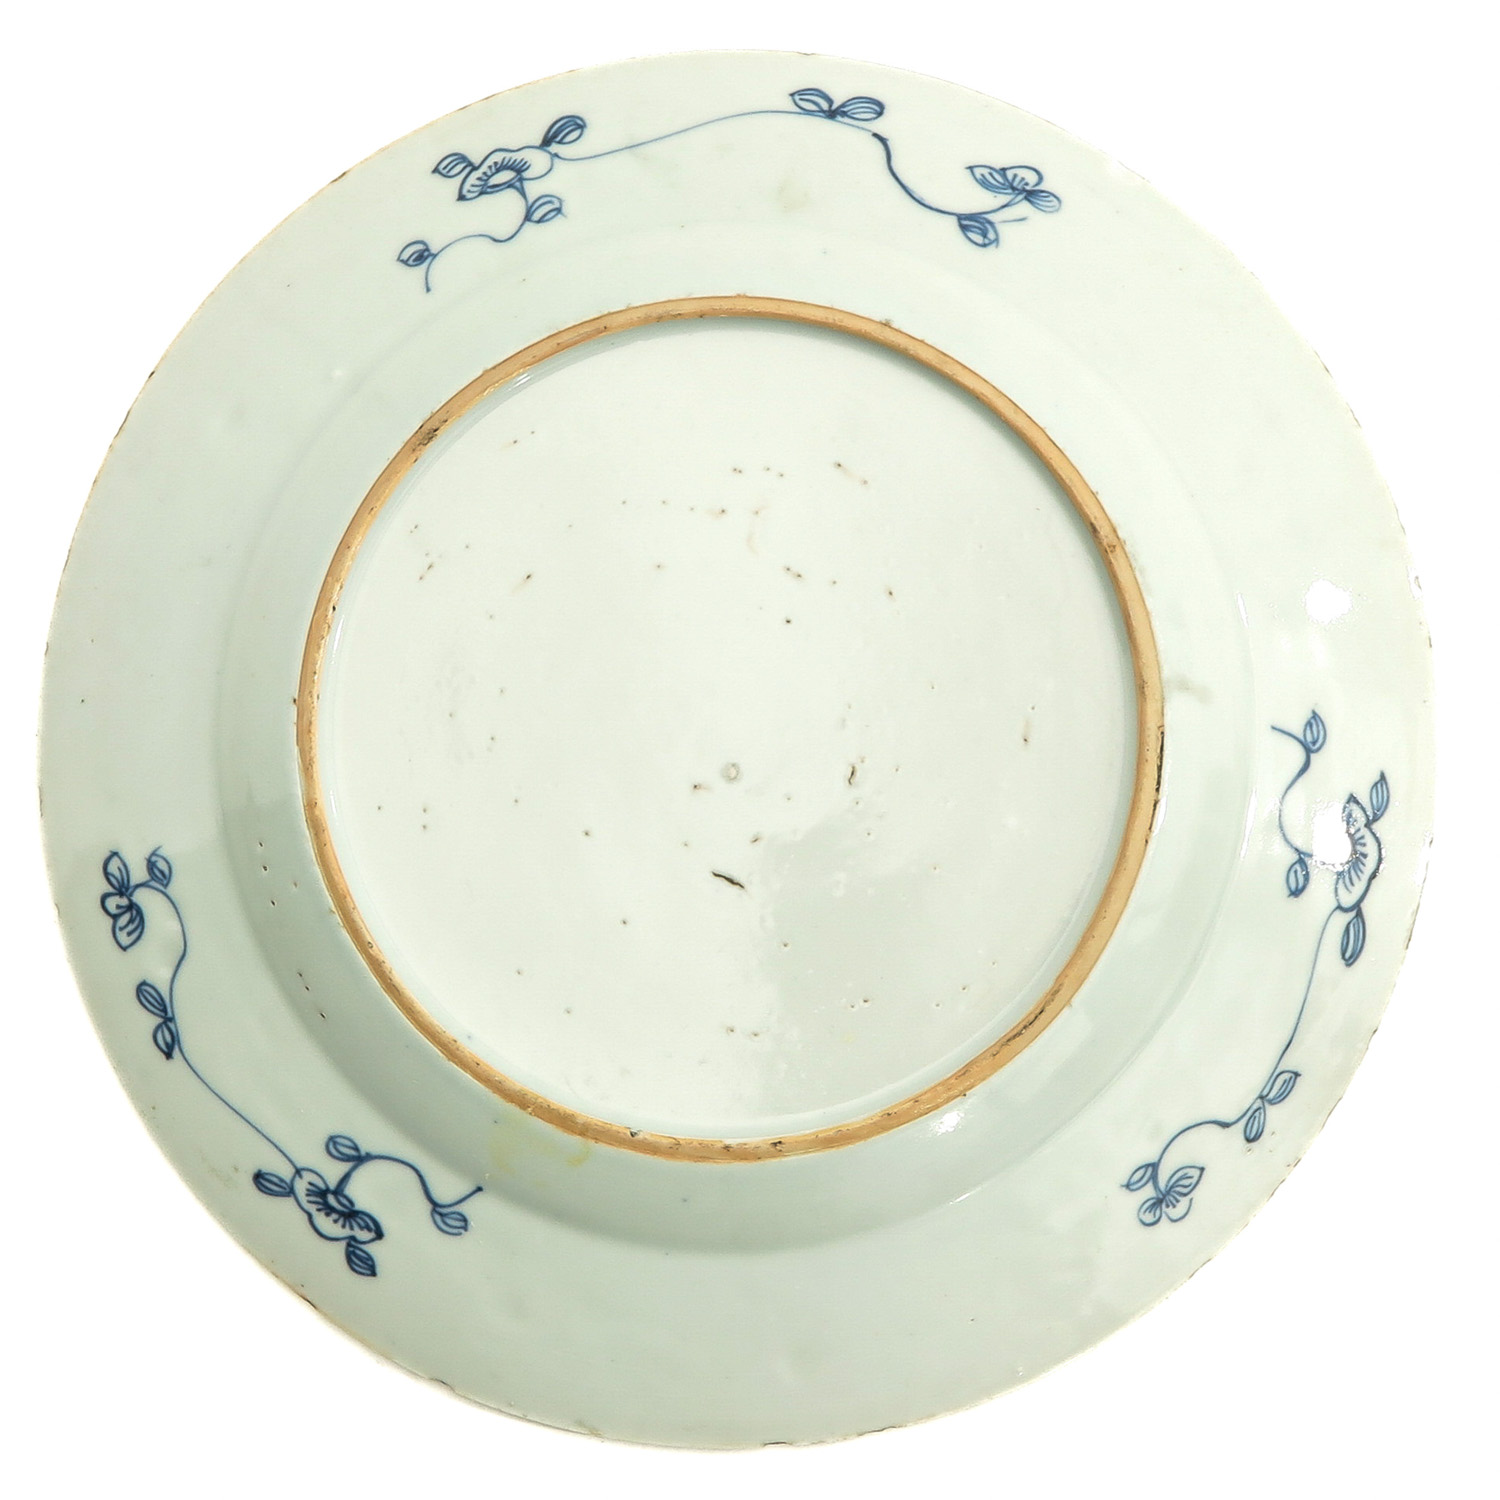 A Series of 3 Blue and White Plates - Image 4 of 10